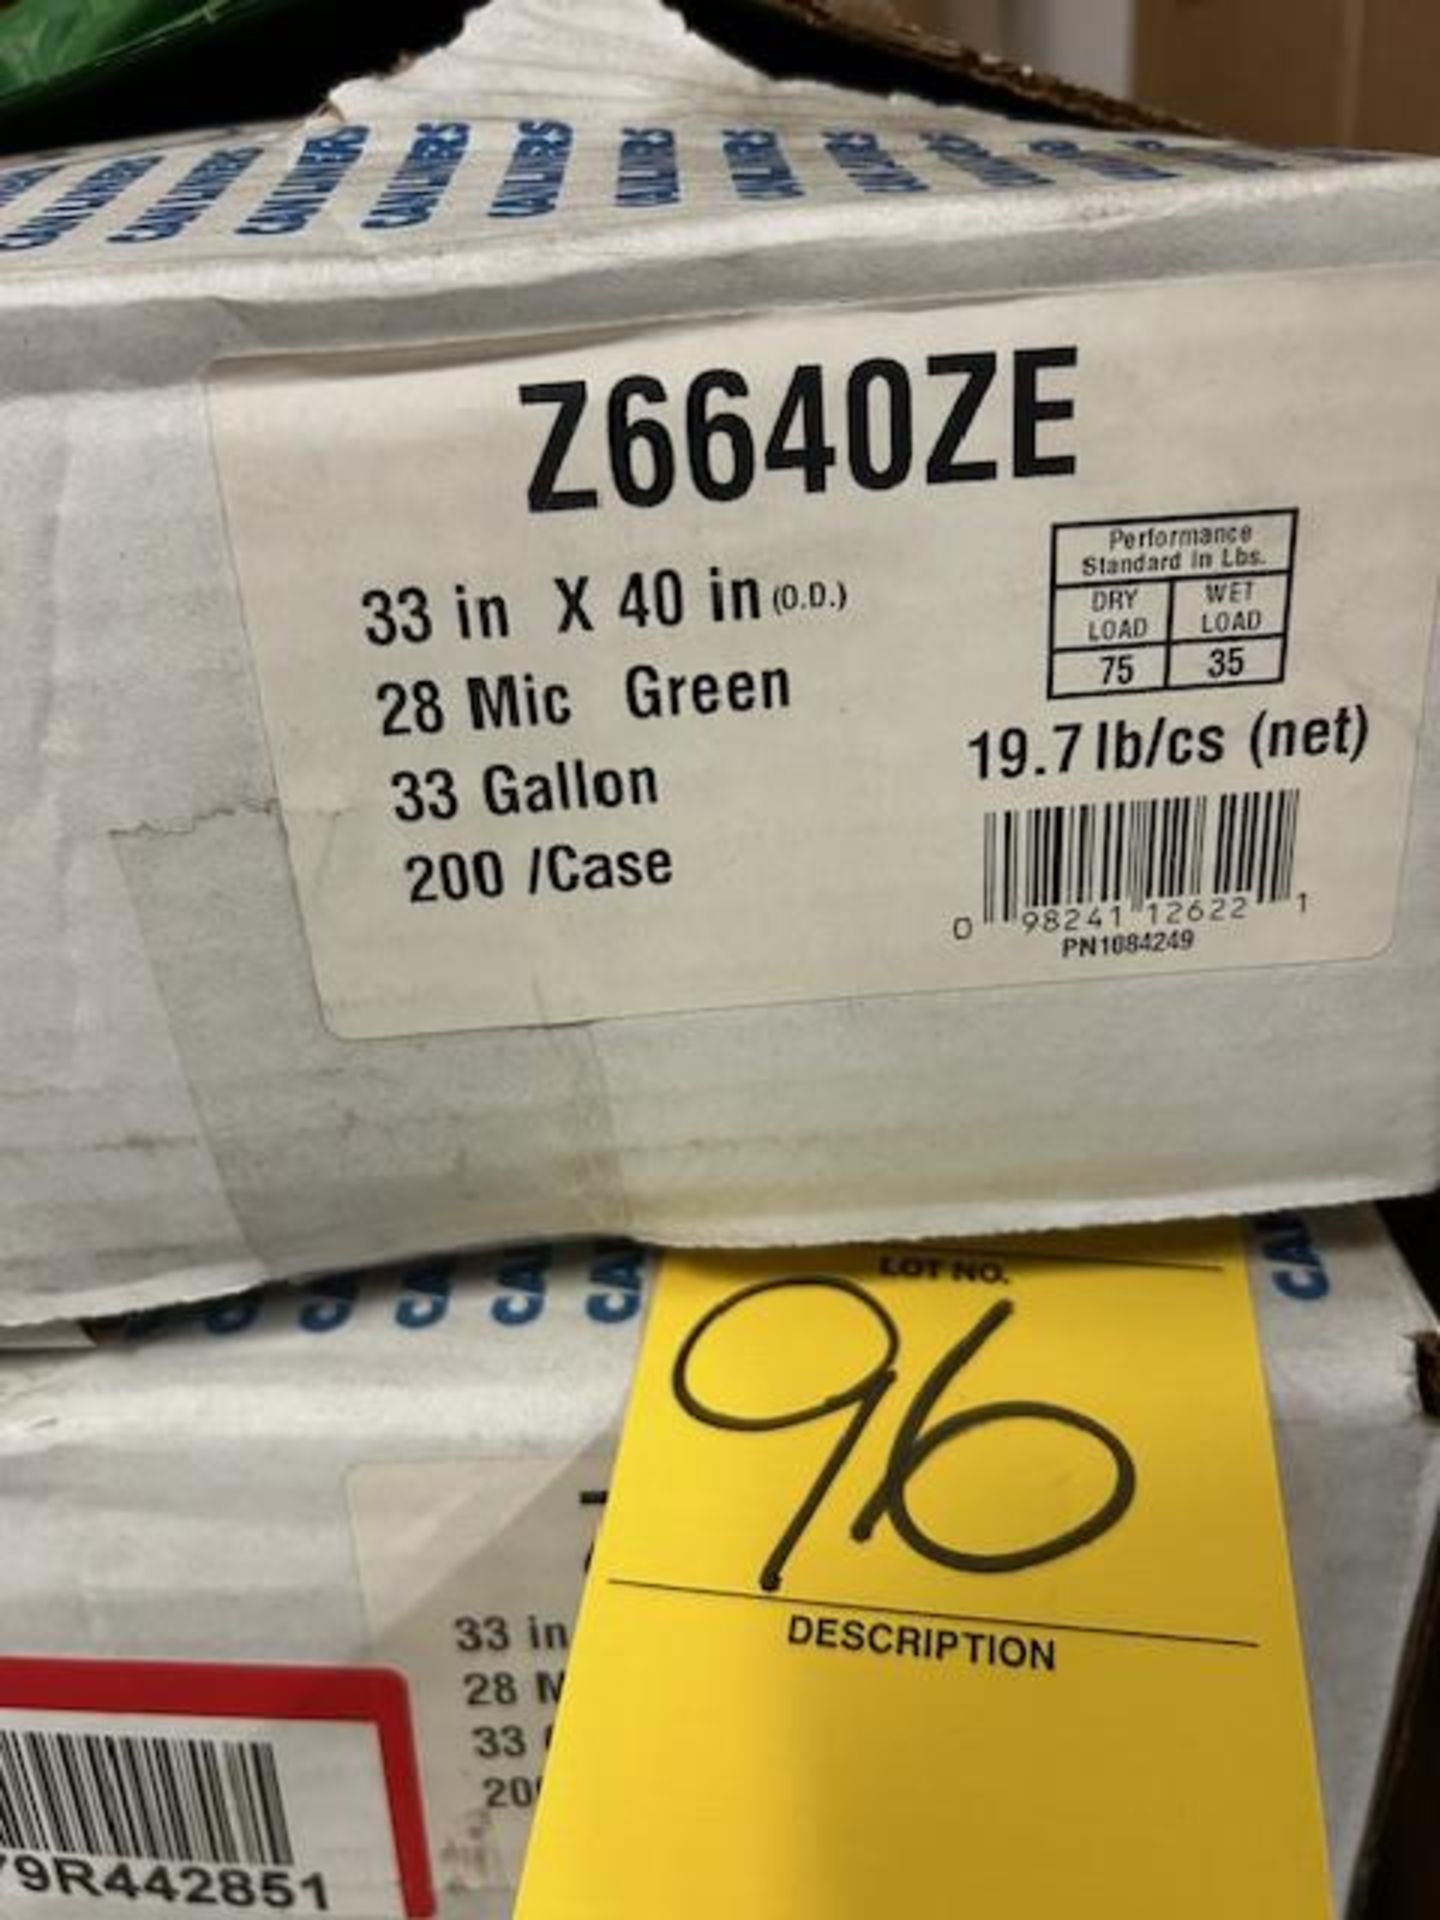 (23) Cases - Z6640ZE 33 x 40 28 Mic Green 33 Gallon Garbage Bag (Pack 200) - Image 2 of 3